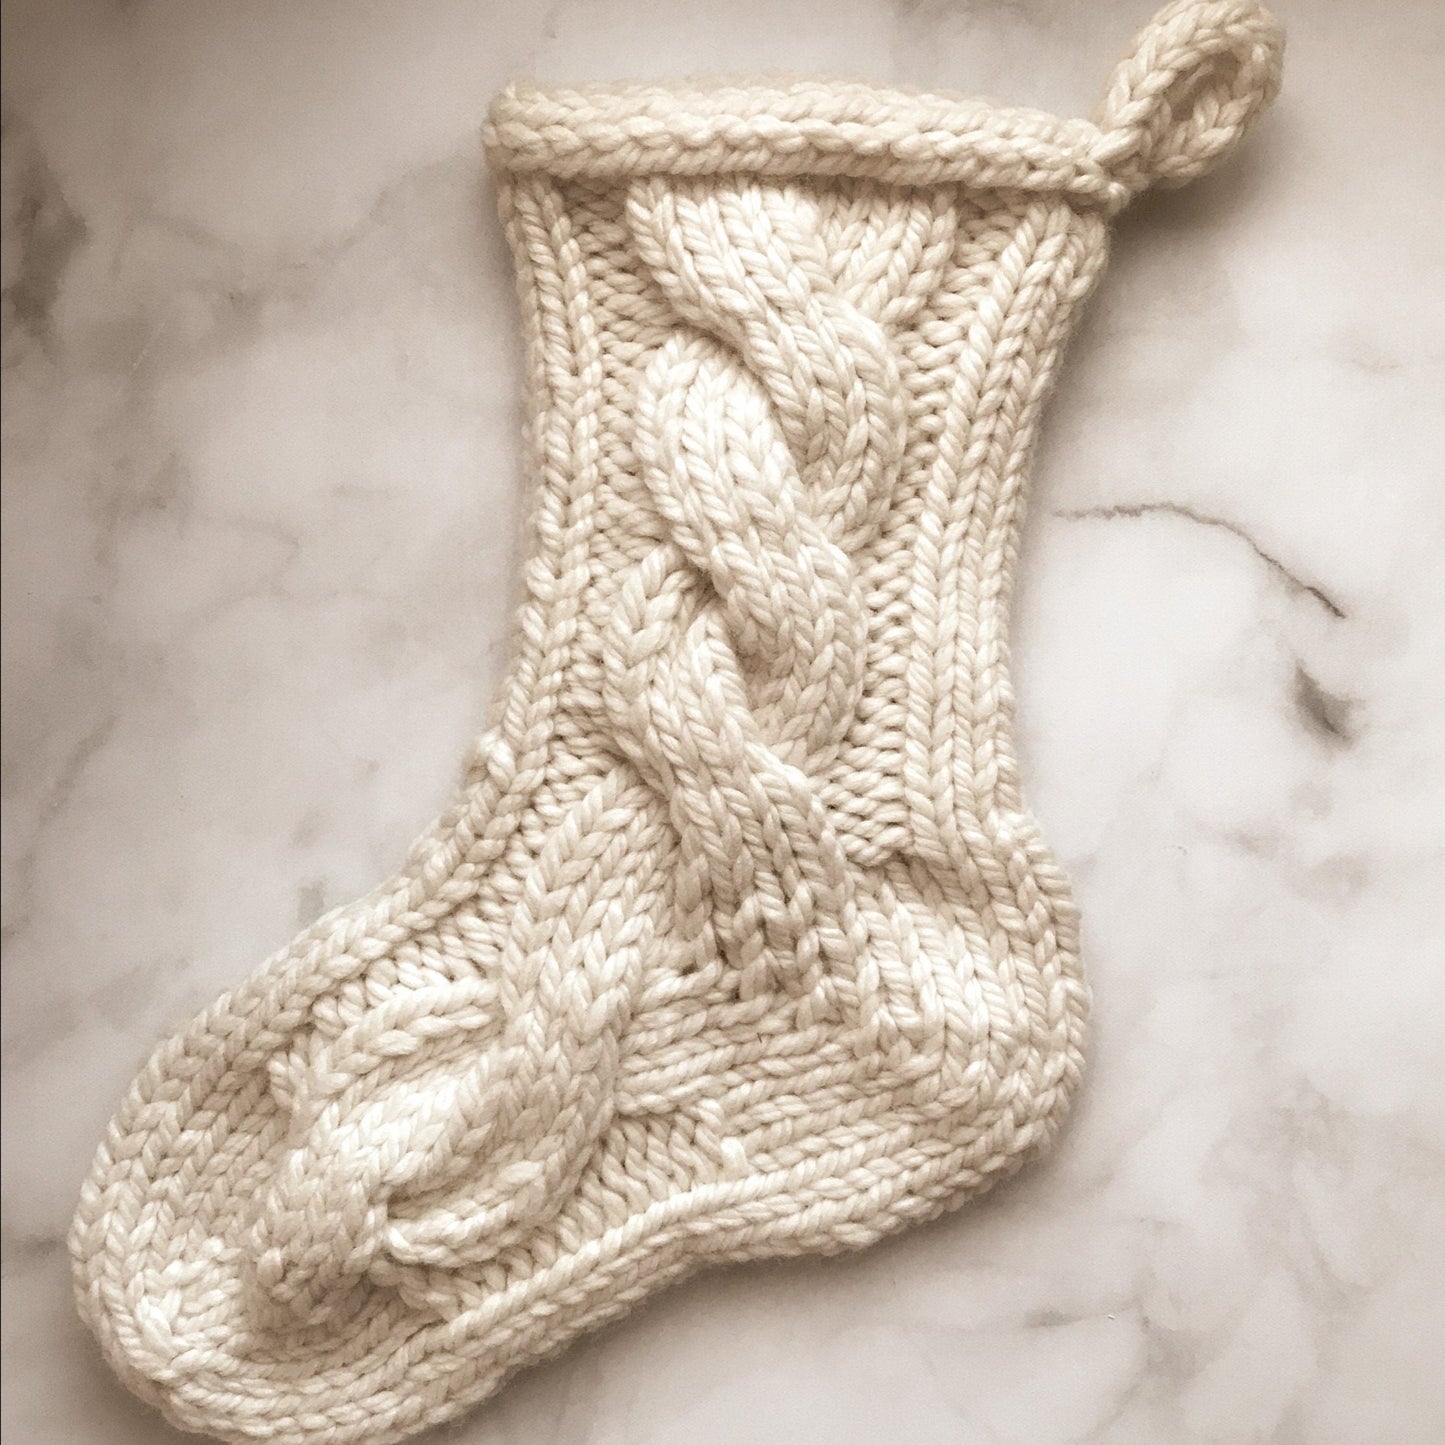 Home for Christmas: Cable Stocking Pattern